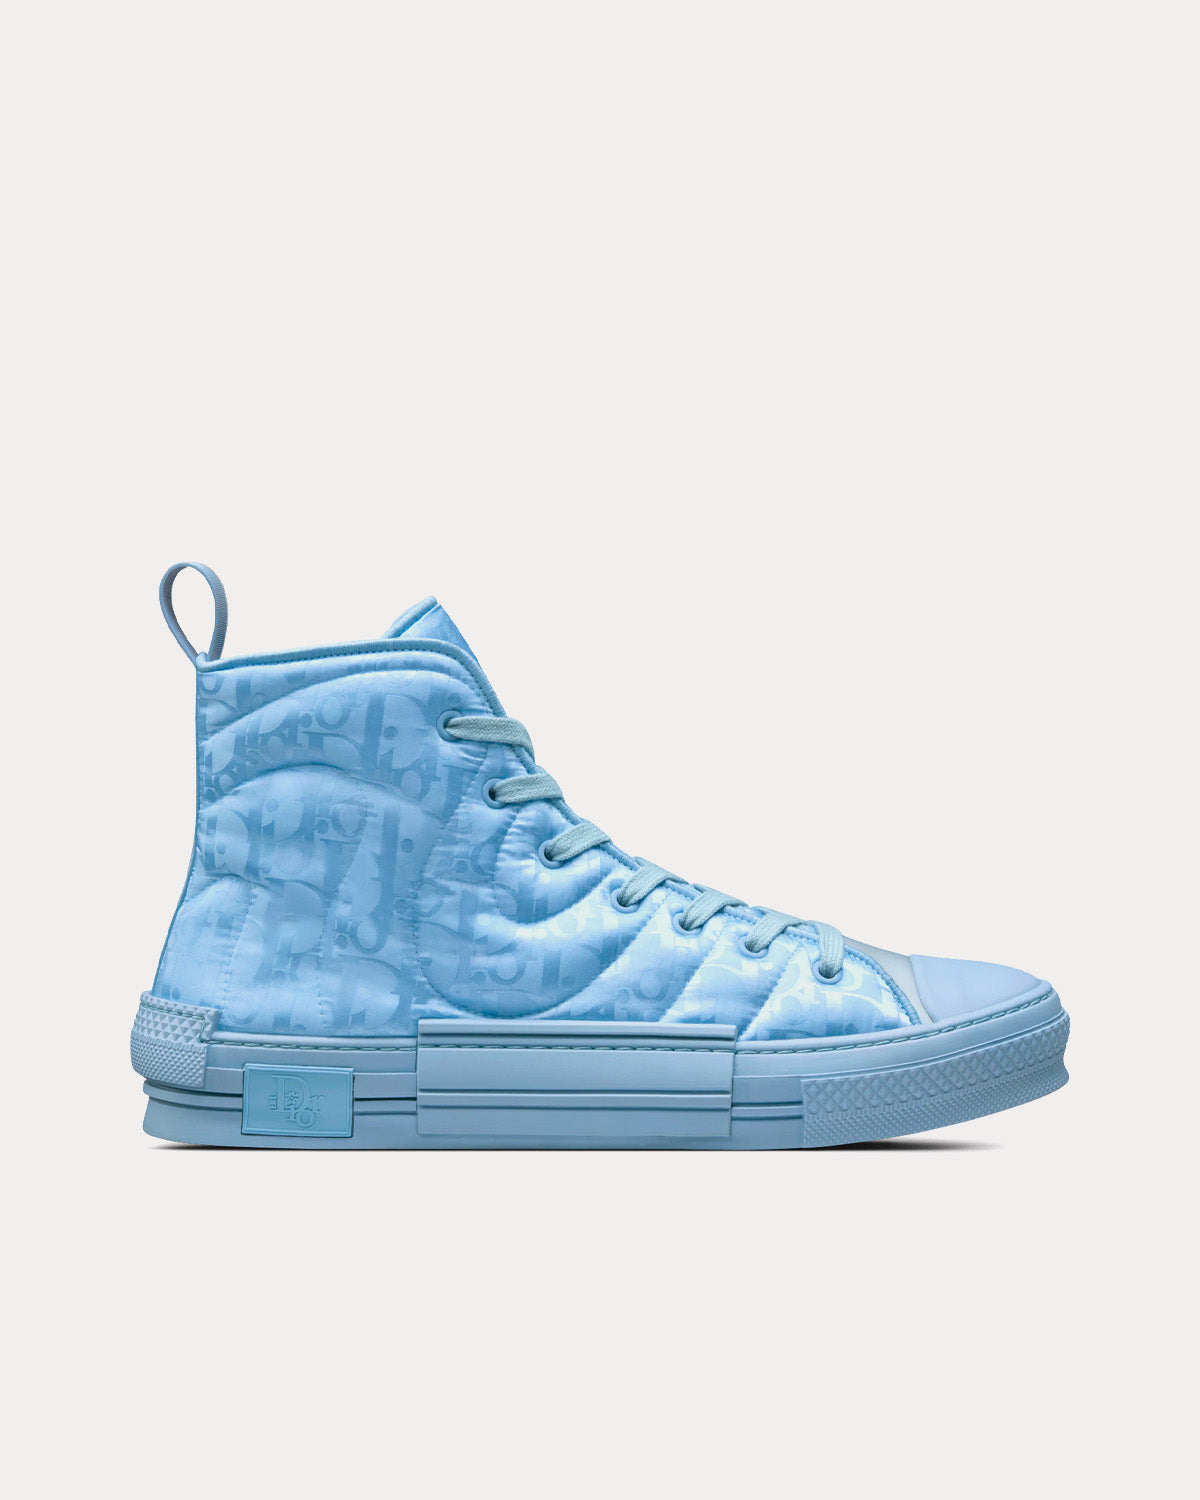 Dior x ERL - B23 Blue Dior Oblique Mirage Quilted Technical Fabric with Swirl Motif High Top Sneakers